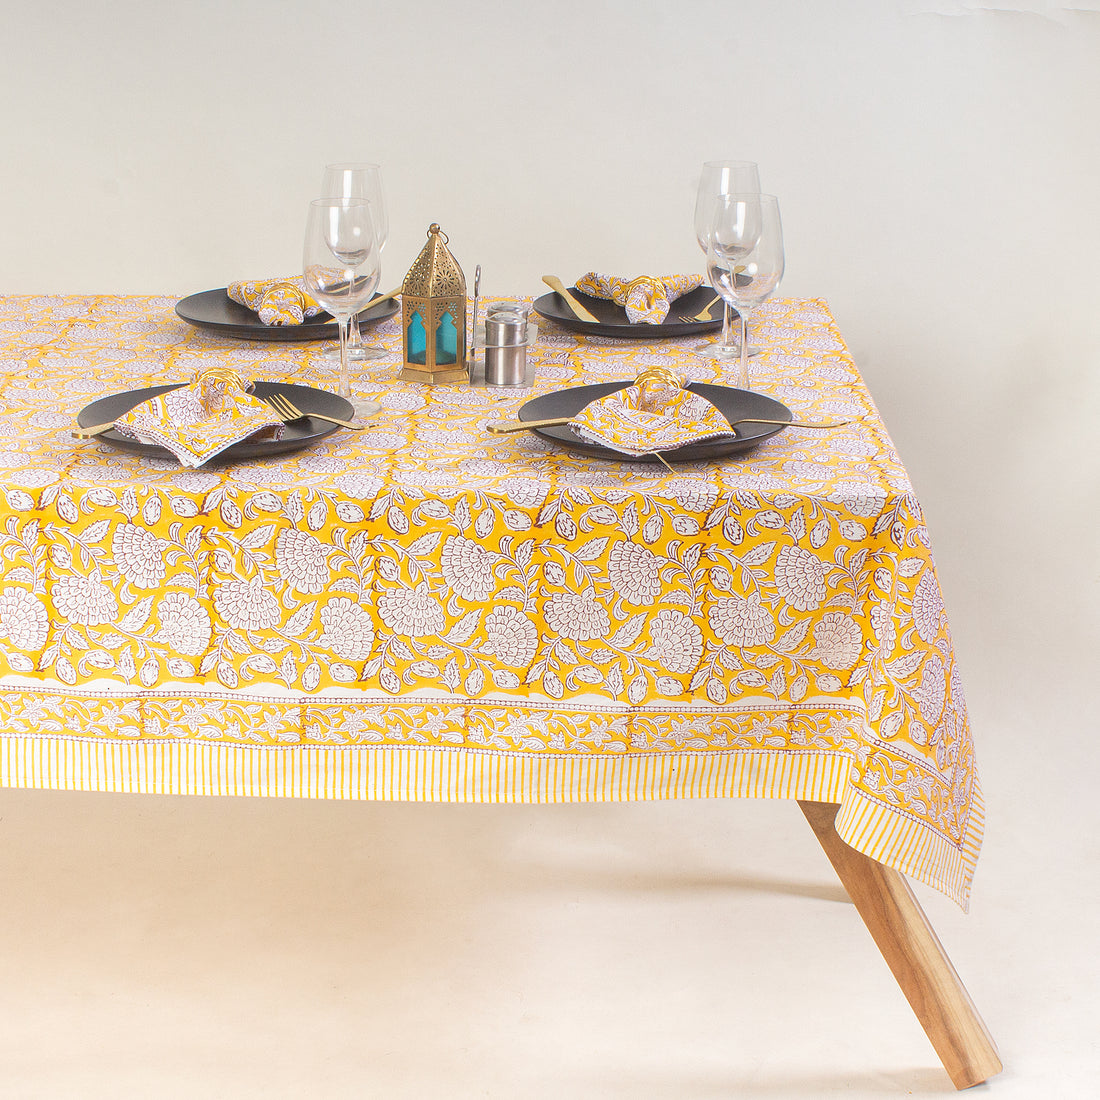 Gold Hand Block Floral Print Modern Dining Table Cover